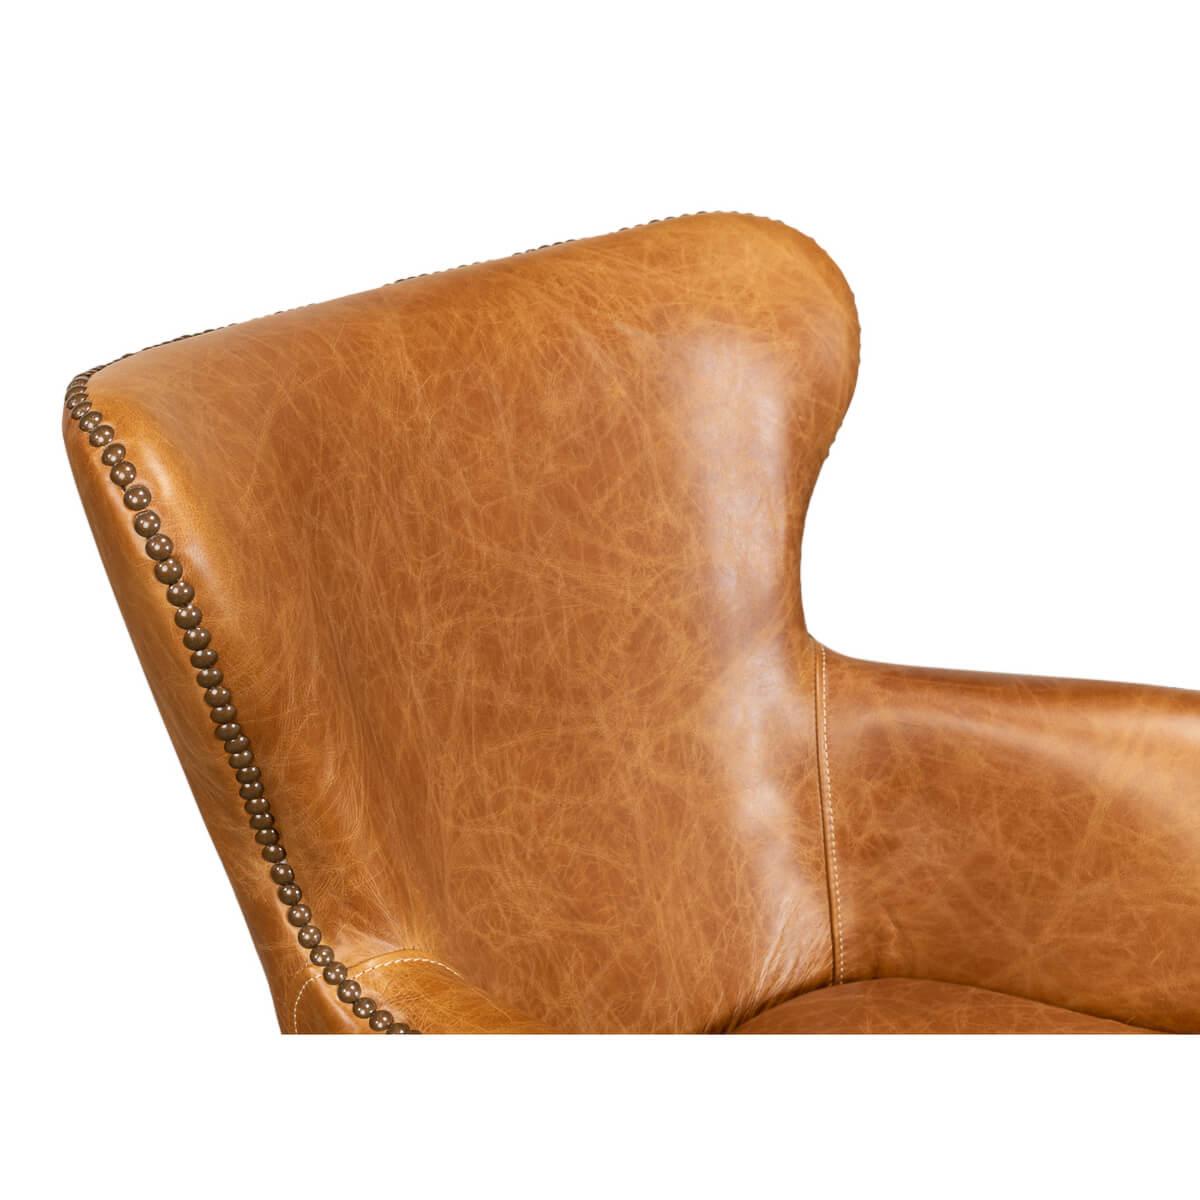 Contemporary Modern Tan Saddle Leather Desk Chair For Sale